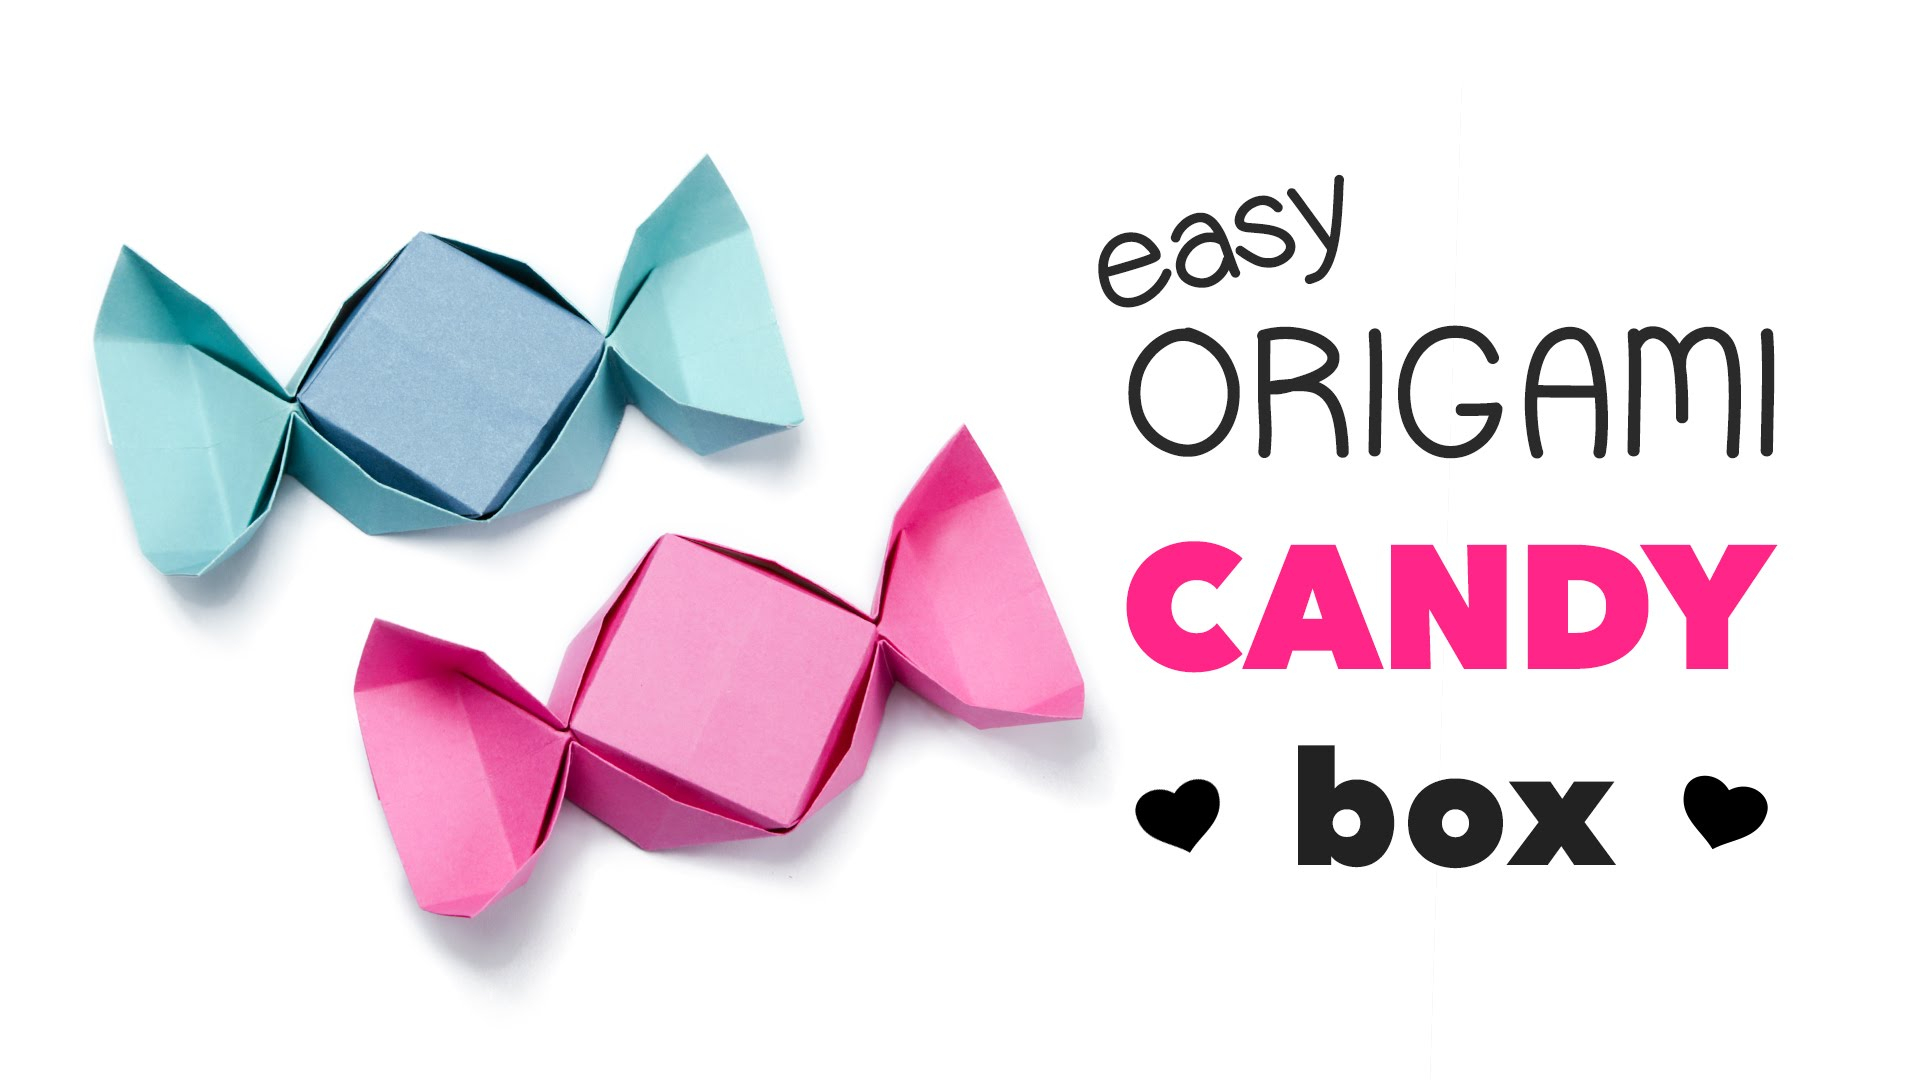 How To Make Easy Origami Box 19 Easy Origami Boxes Easy Origami Candy Box Instructions Paper